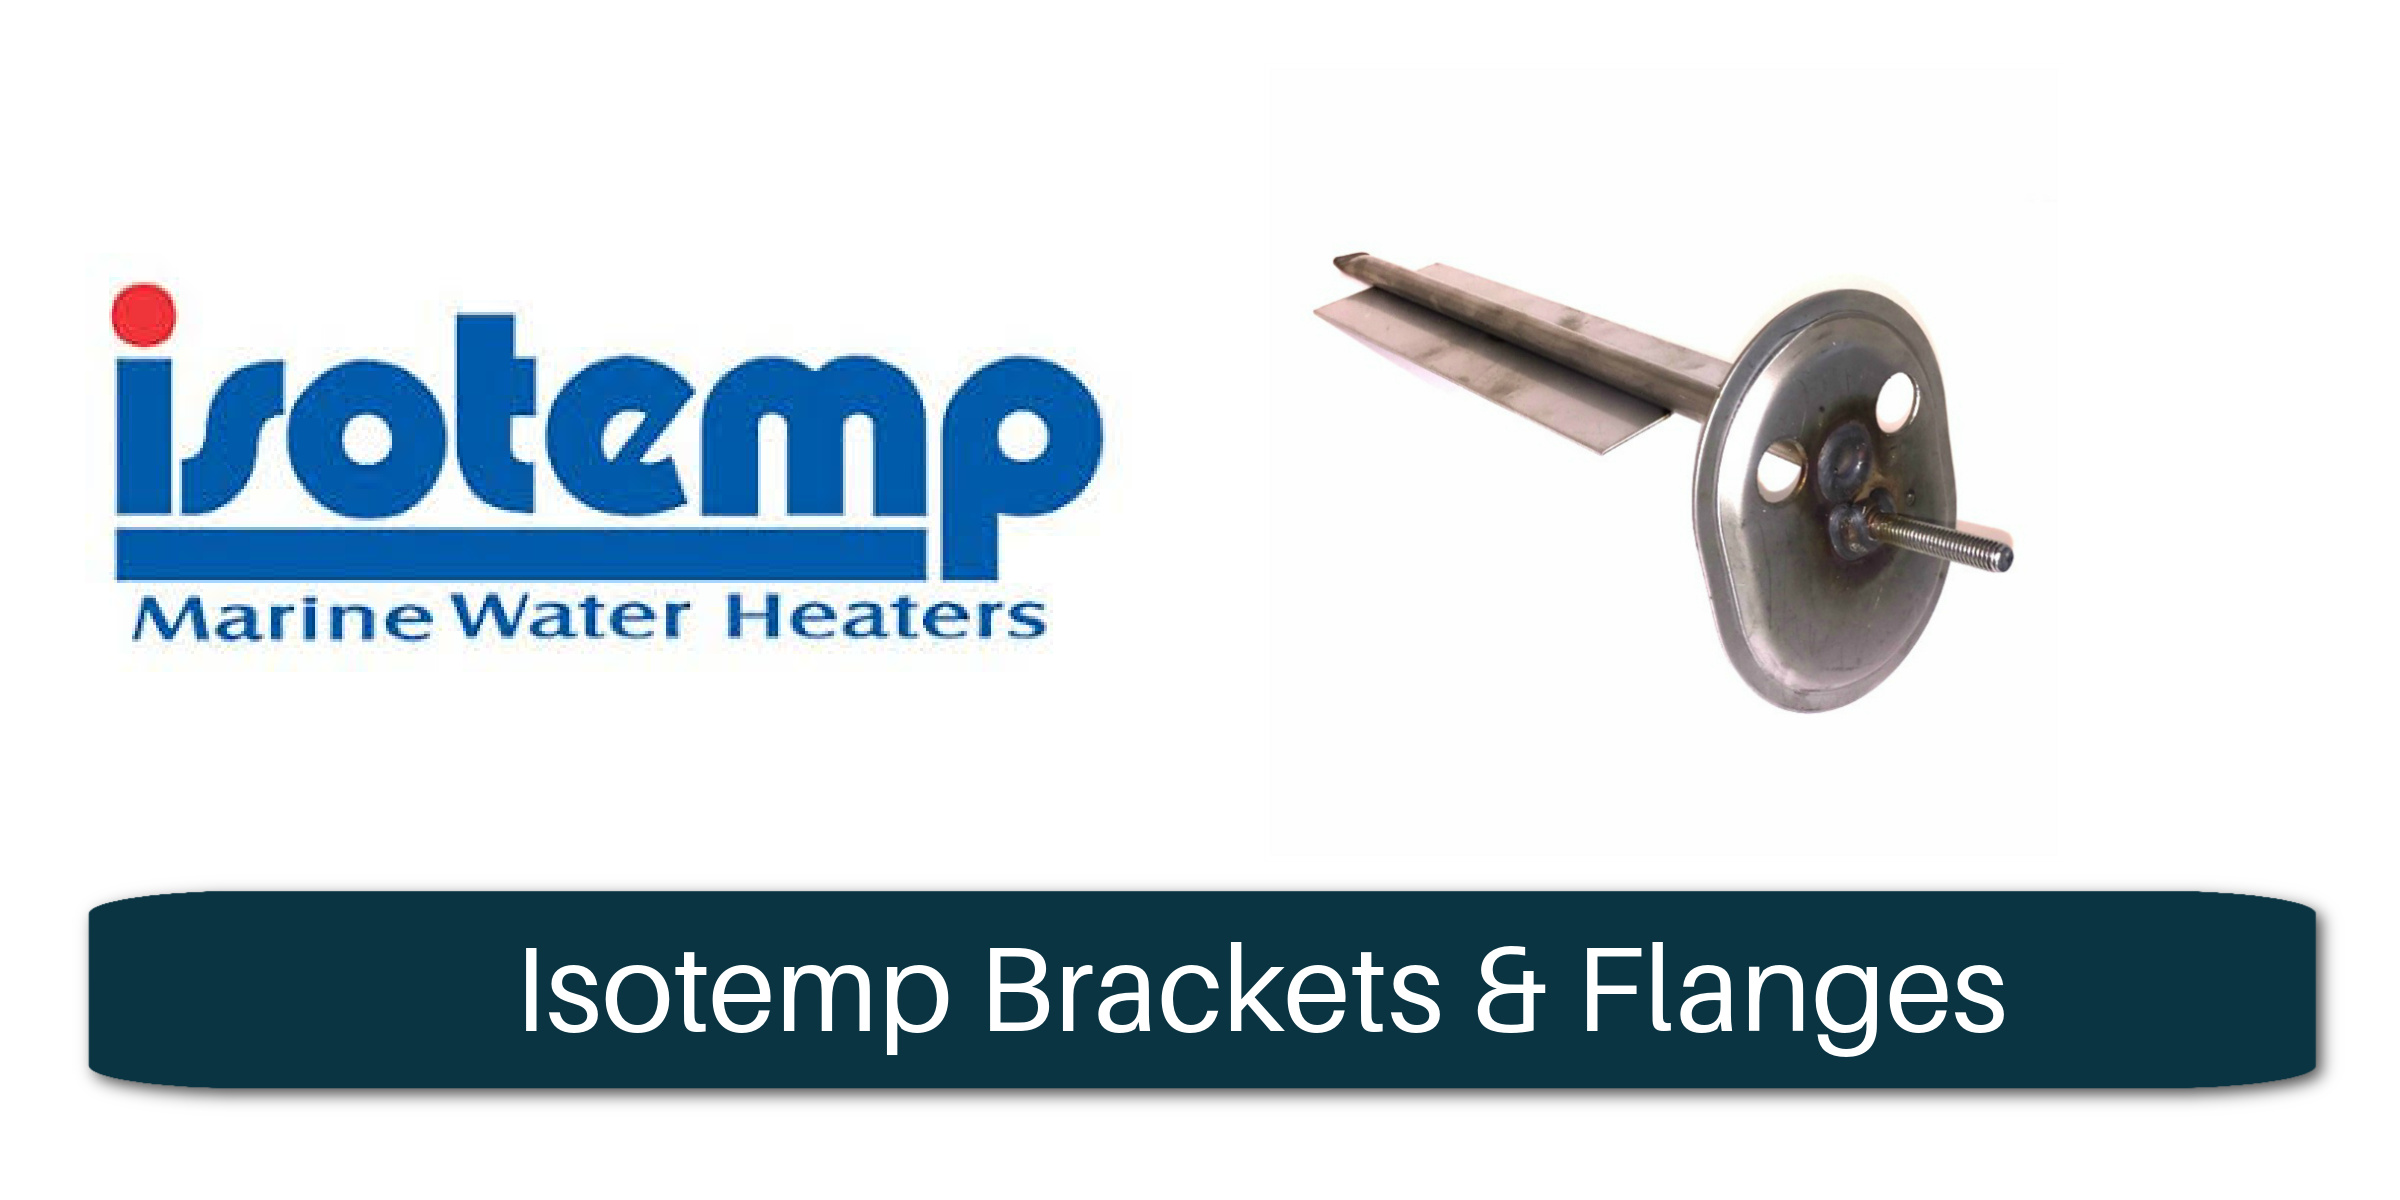 Isotemp Brackets & Flanges